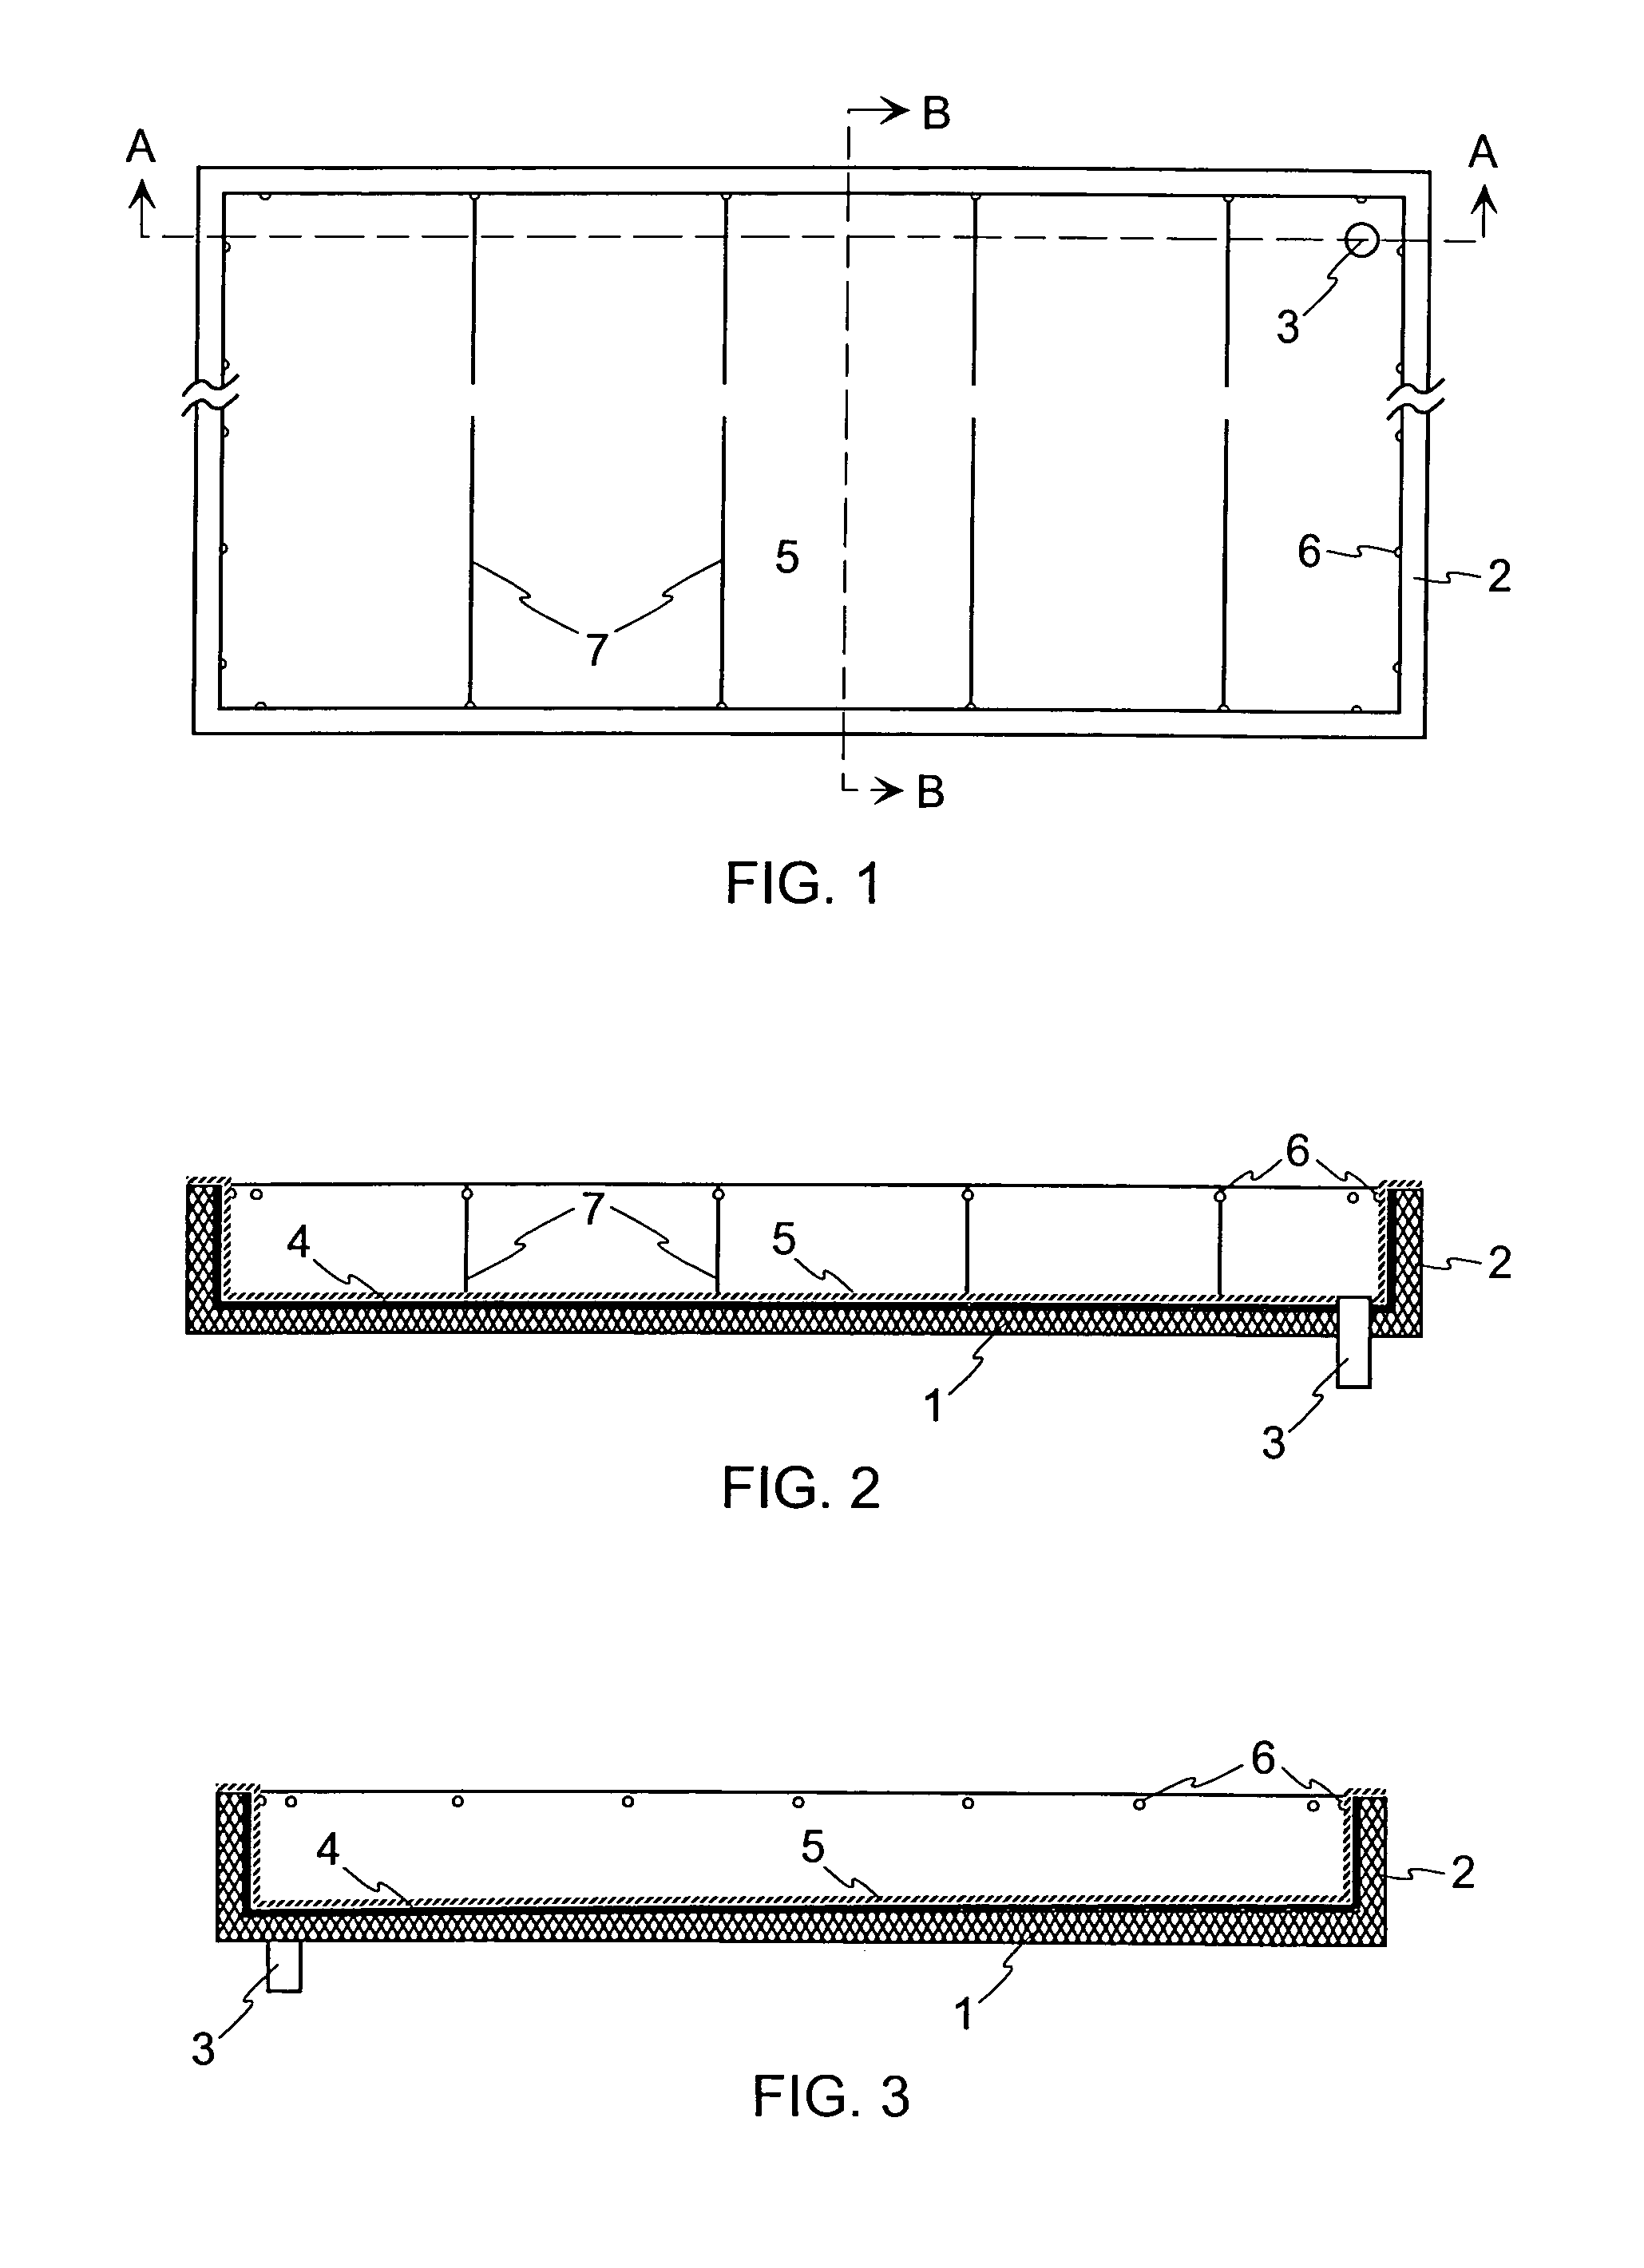 Roof waterproofing system consisting of an organic resin protected by an aluminum-copolymer composite foil